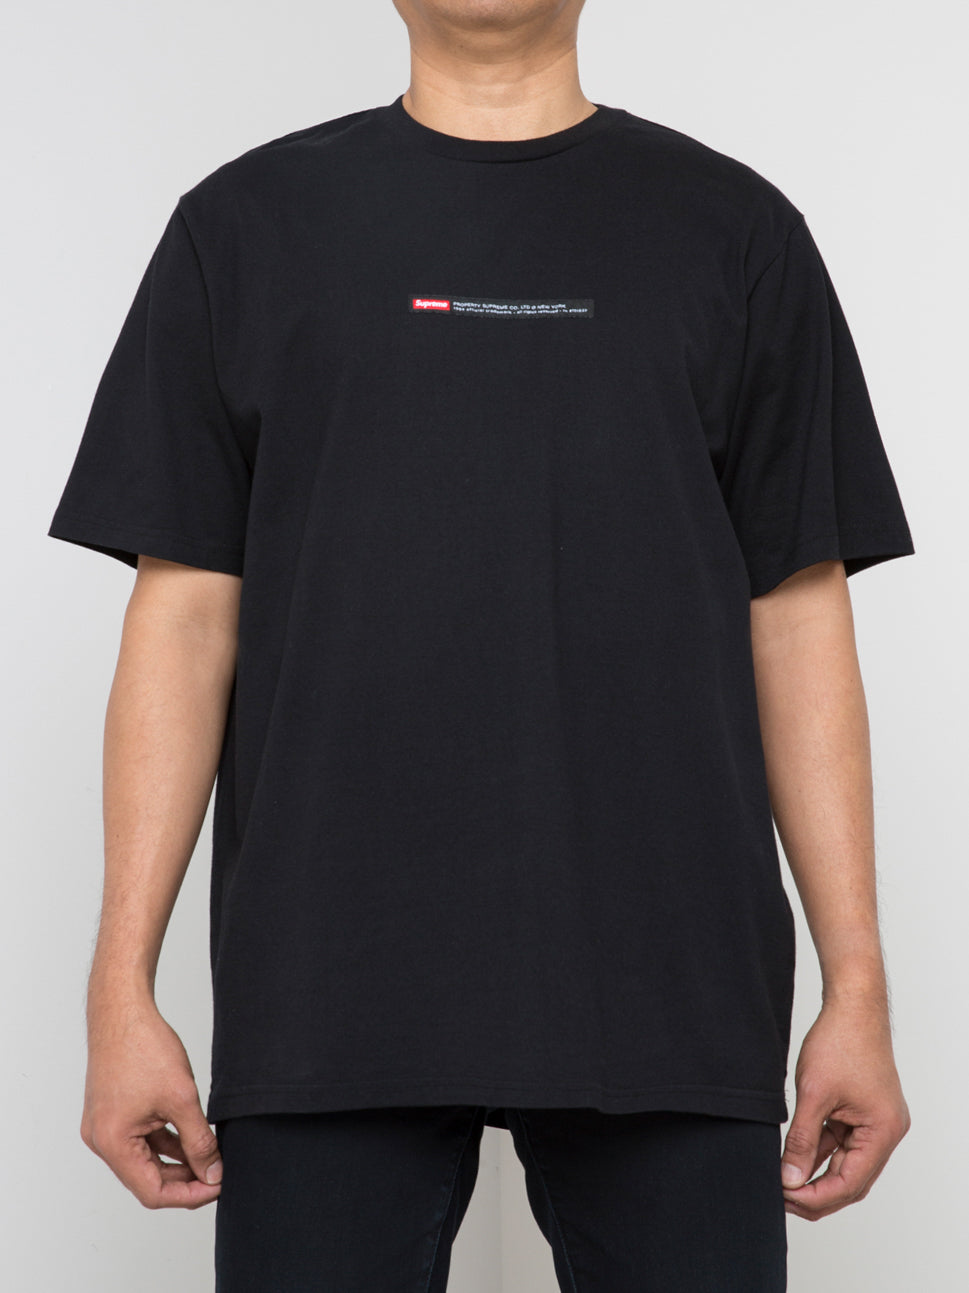 L Supreme Property Label S/S Top Tシャツ - Tシャツ/カットソー(半袖